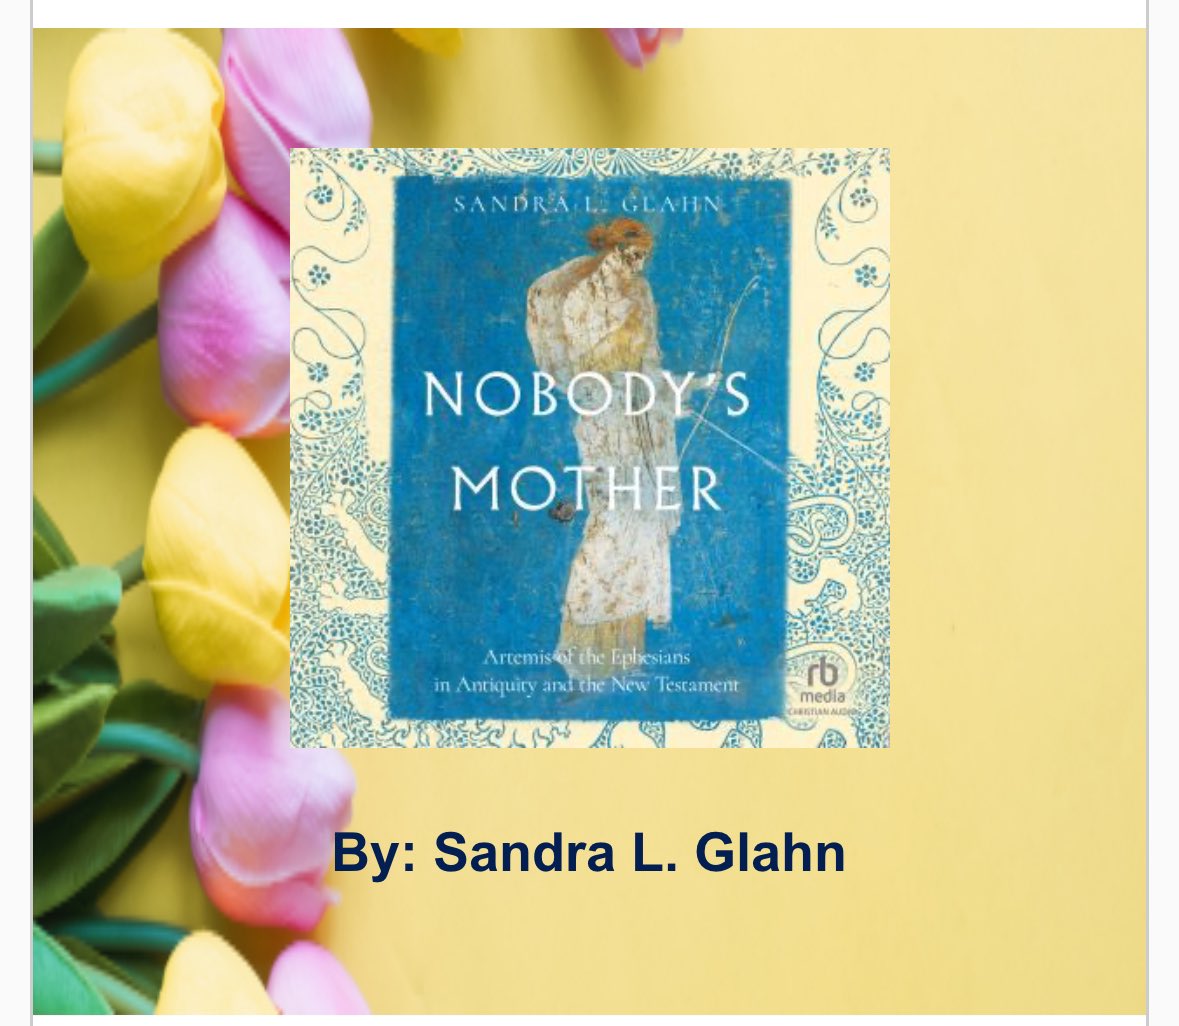 Get 60% OFF the audio version of “Nobody's Mother: Artemis of the Ephesians in Antiquity and the New Testament” through 5/10. audiobooks.com/promotions/pro…